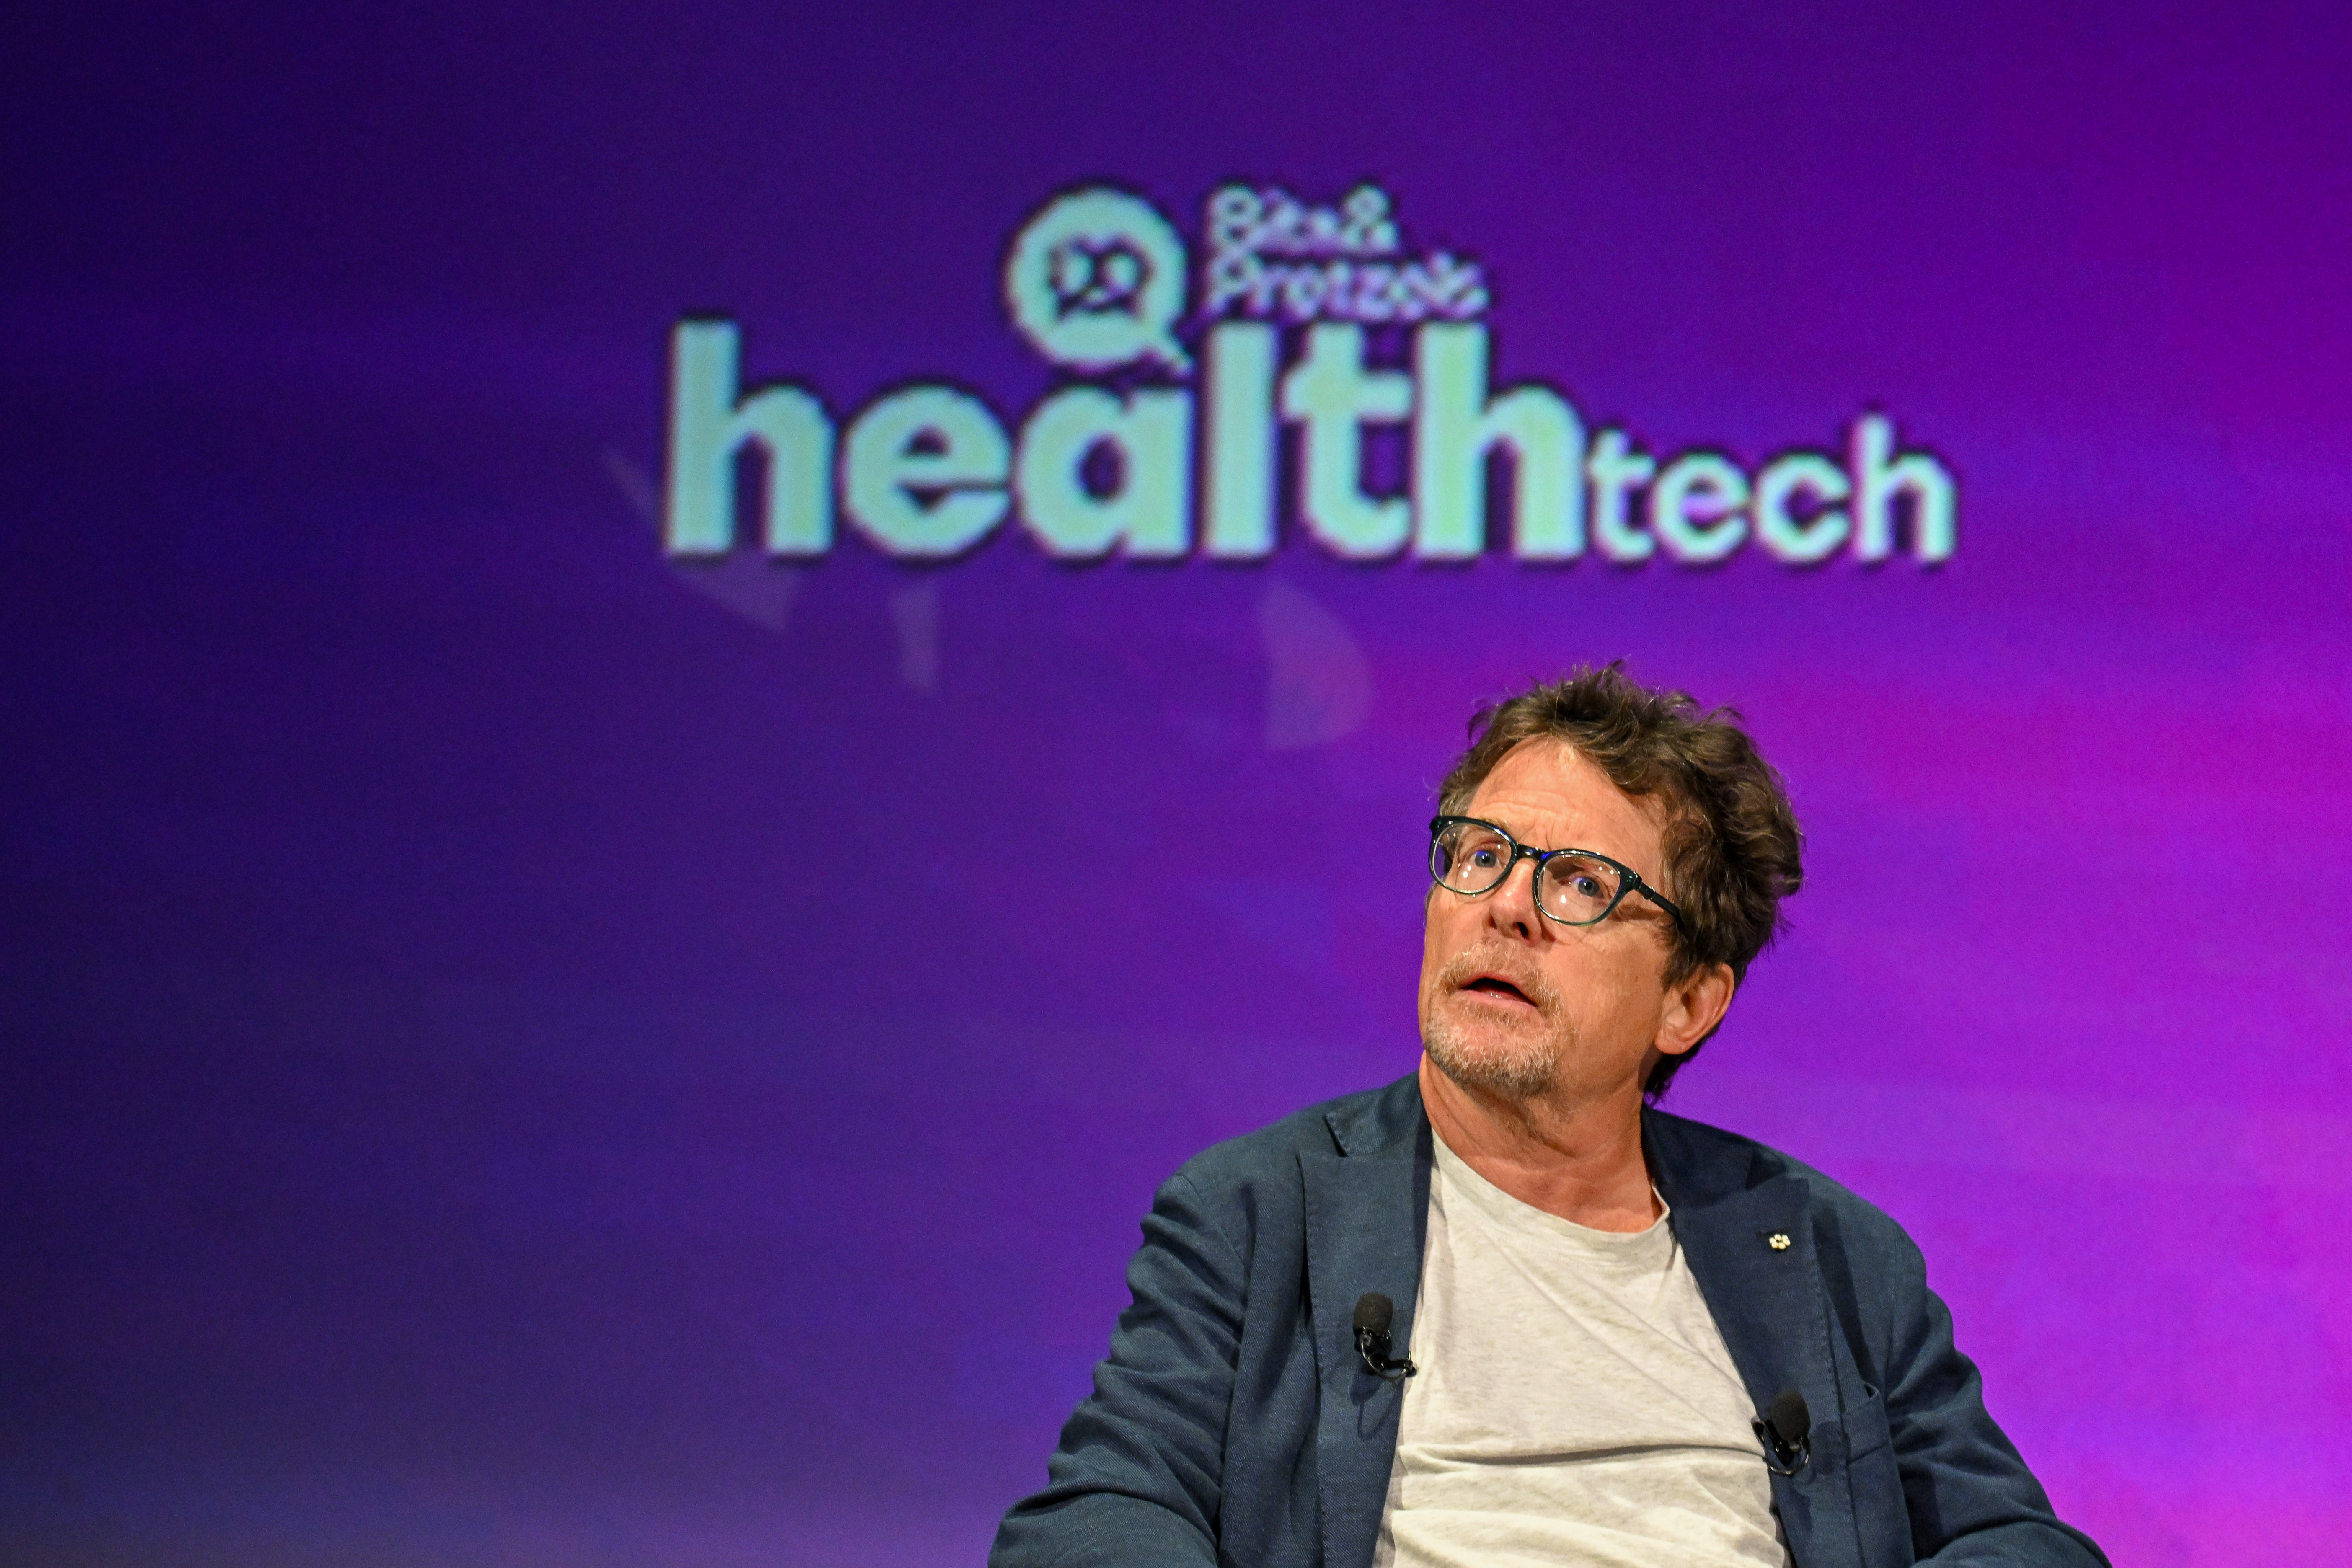 Michael J. Fox accepts the Frontier Award at Bits & Pretzels HealthTech 2023 at ICM Munich on June 20, 2023 in Munich, Germany. | Source: Getty Images